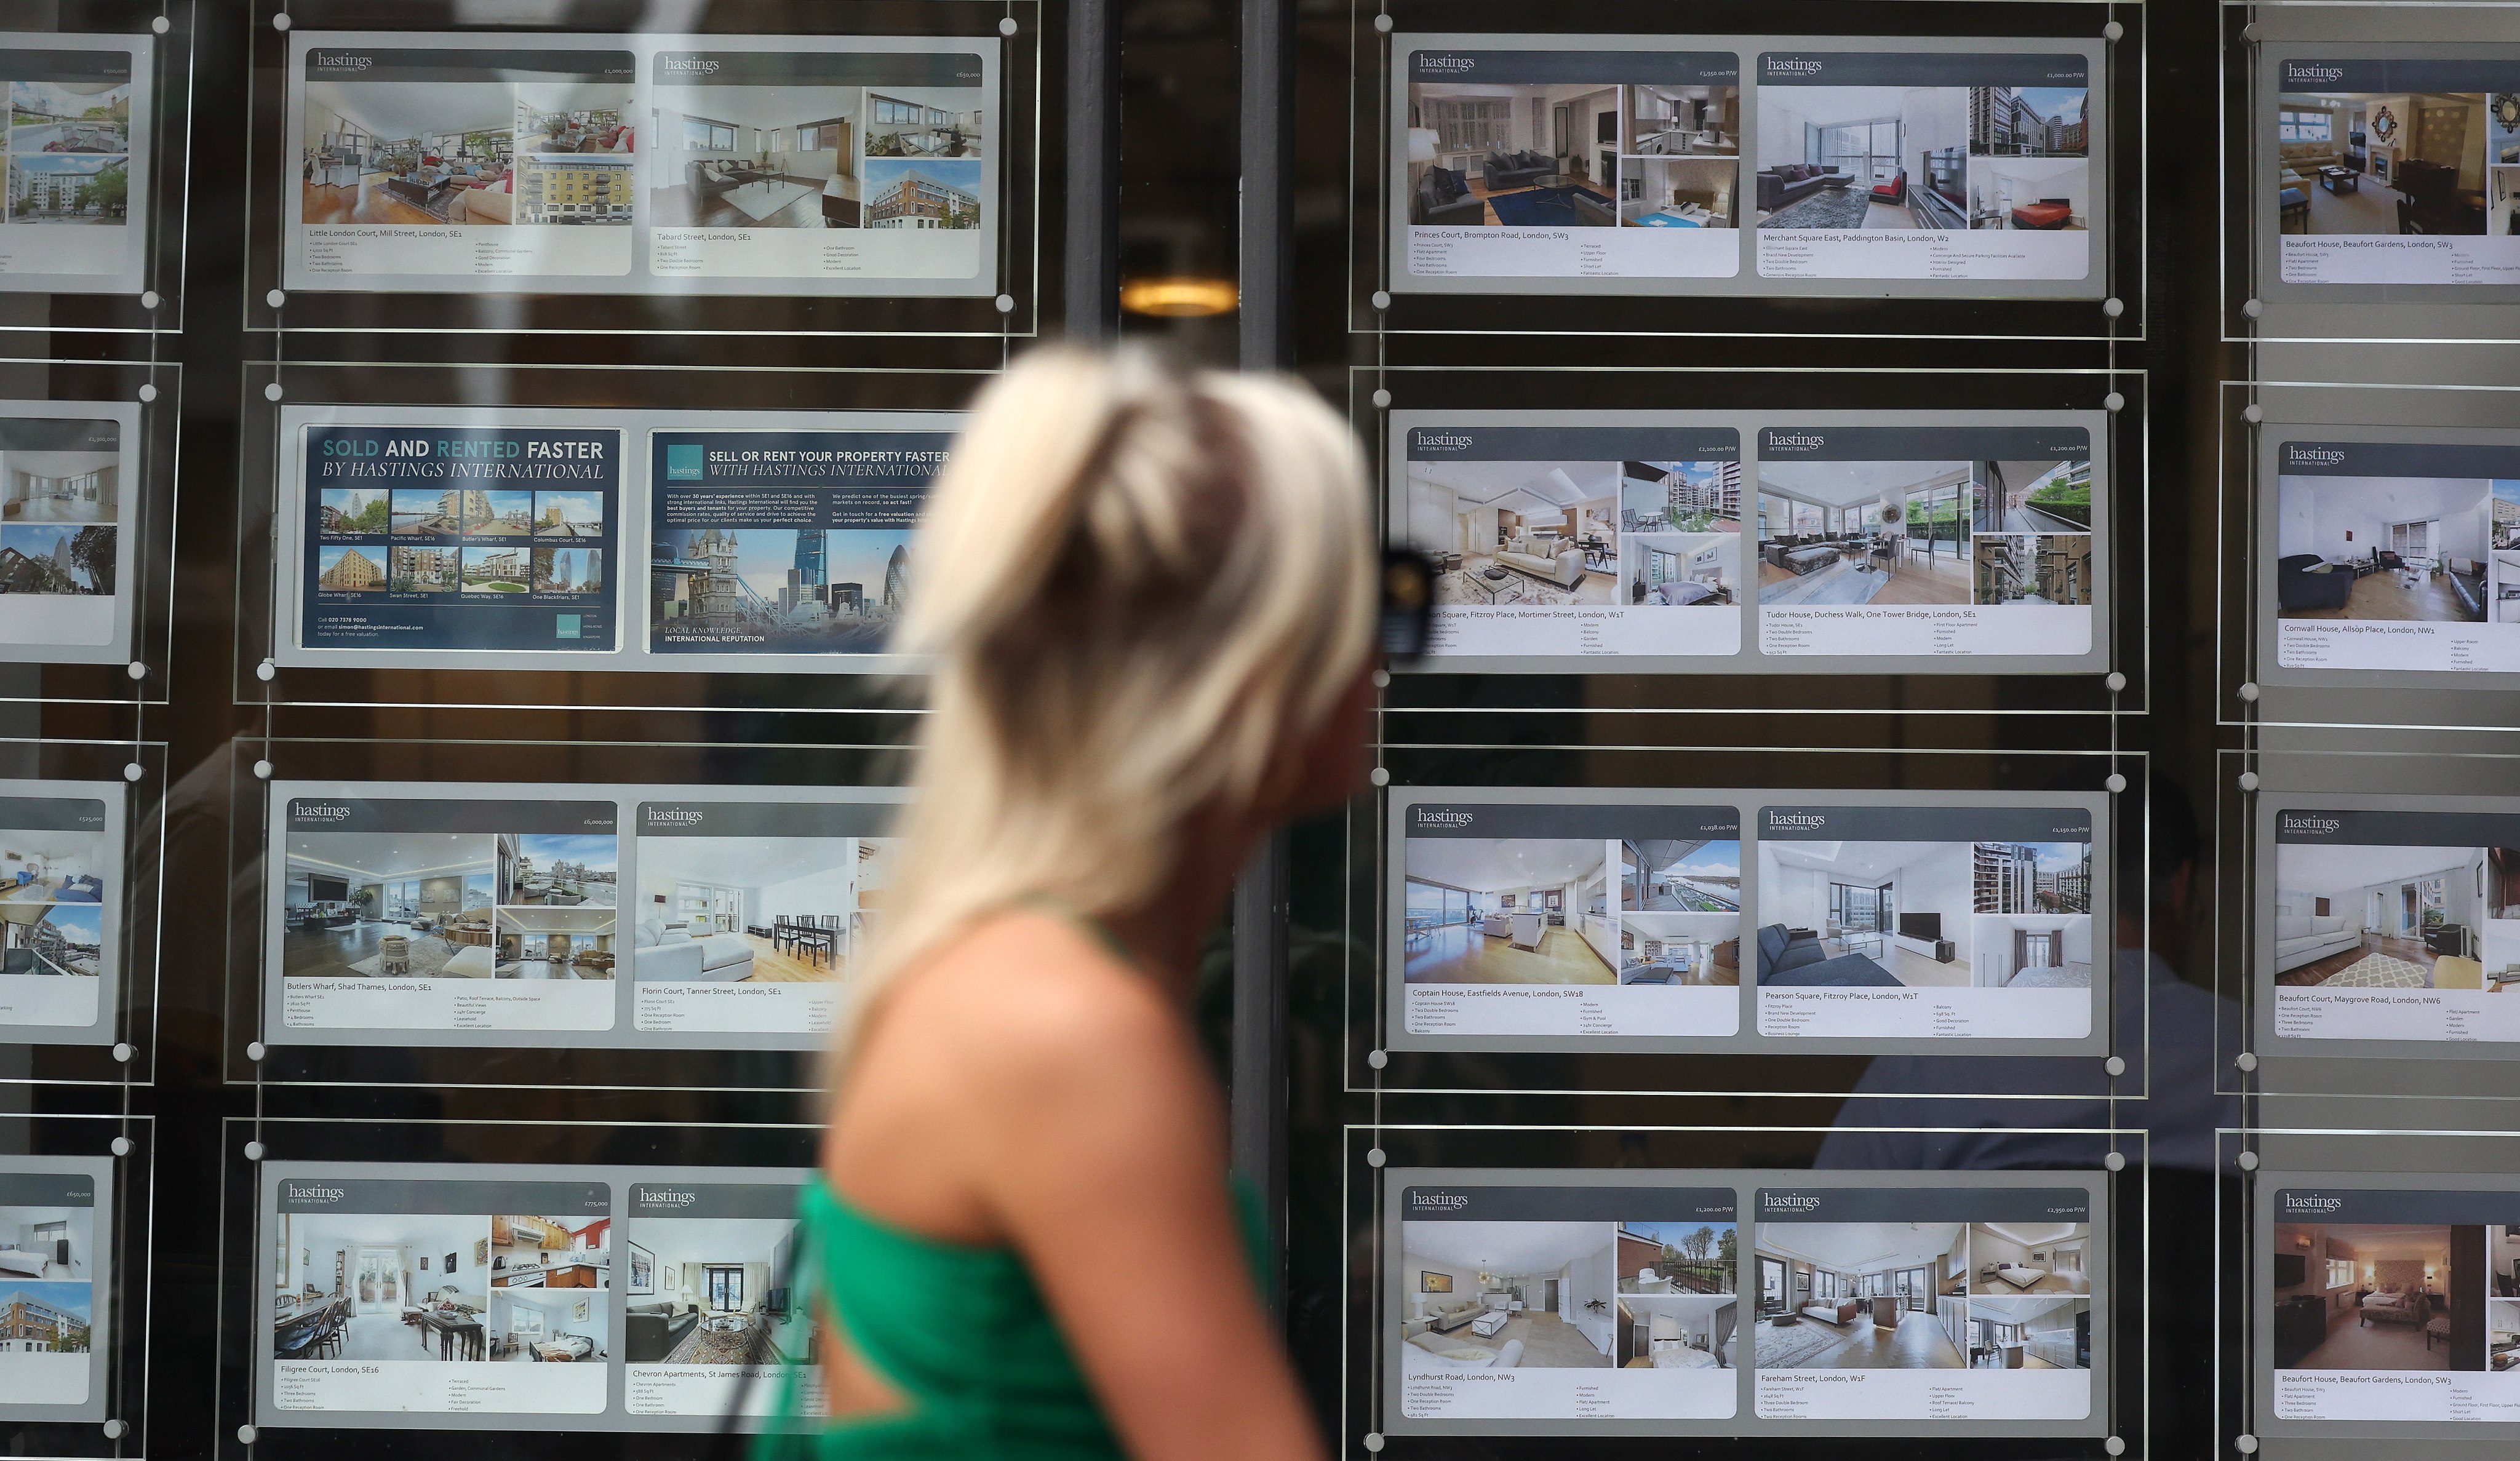 A pedestrian looks over real estate listings at an estate agent in London on August 3. UK mortgage holders are bracing for a further increase in rates after the Bank of England announced another interest rate rise earlier this month. Photo: EPA-EFE